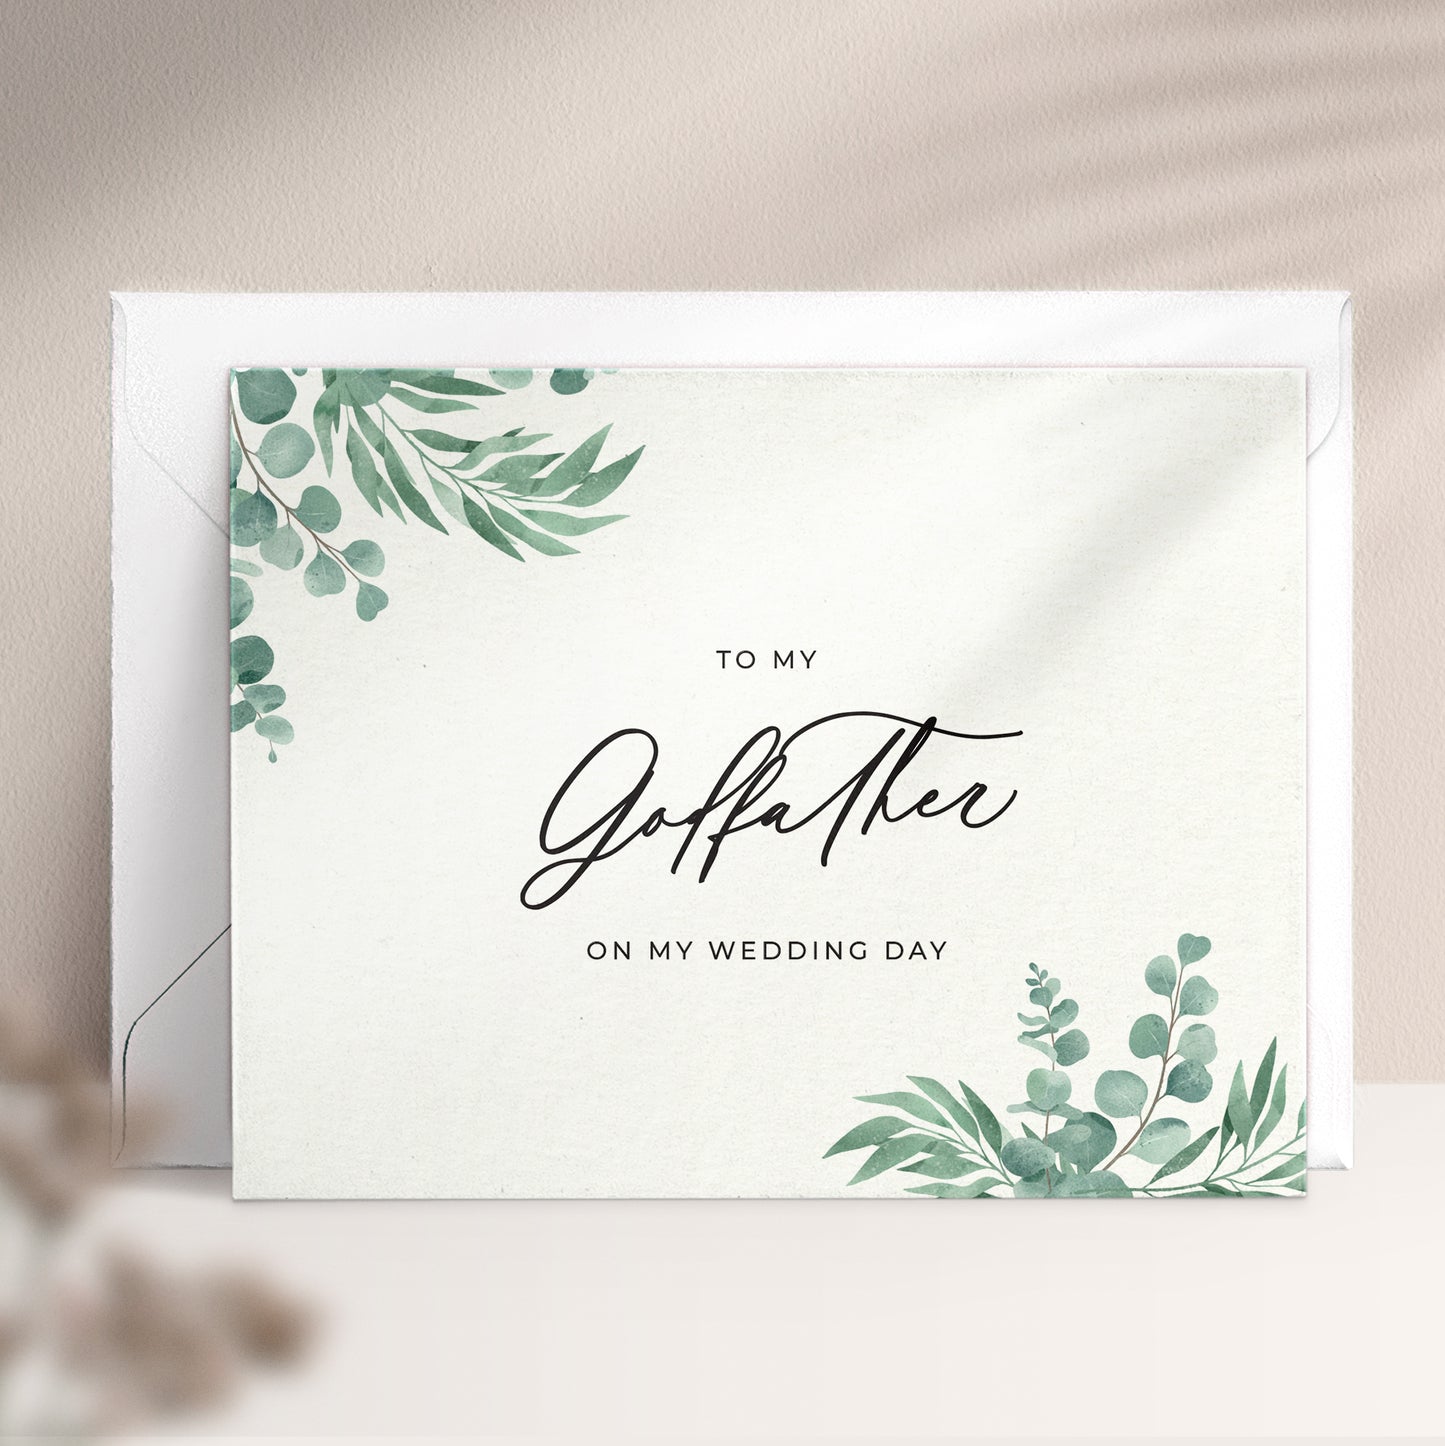 To my godfather on my wedding day note card in greenery design with eucalyptus leaves and calligraphy font from XOXOKristen.